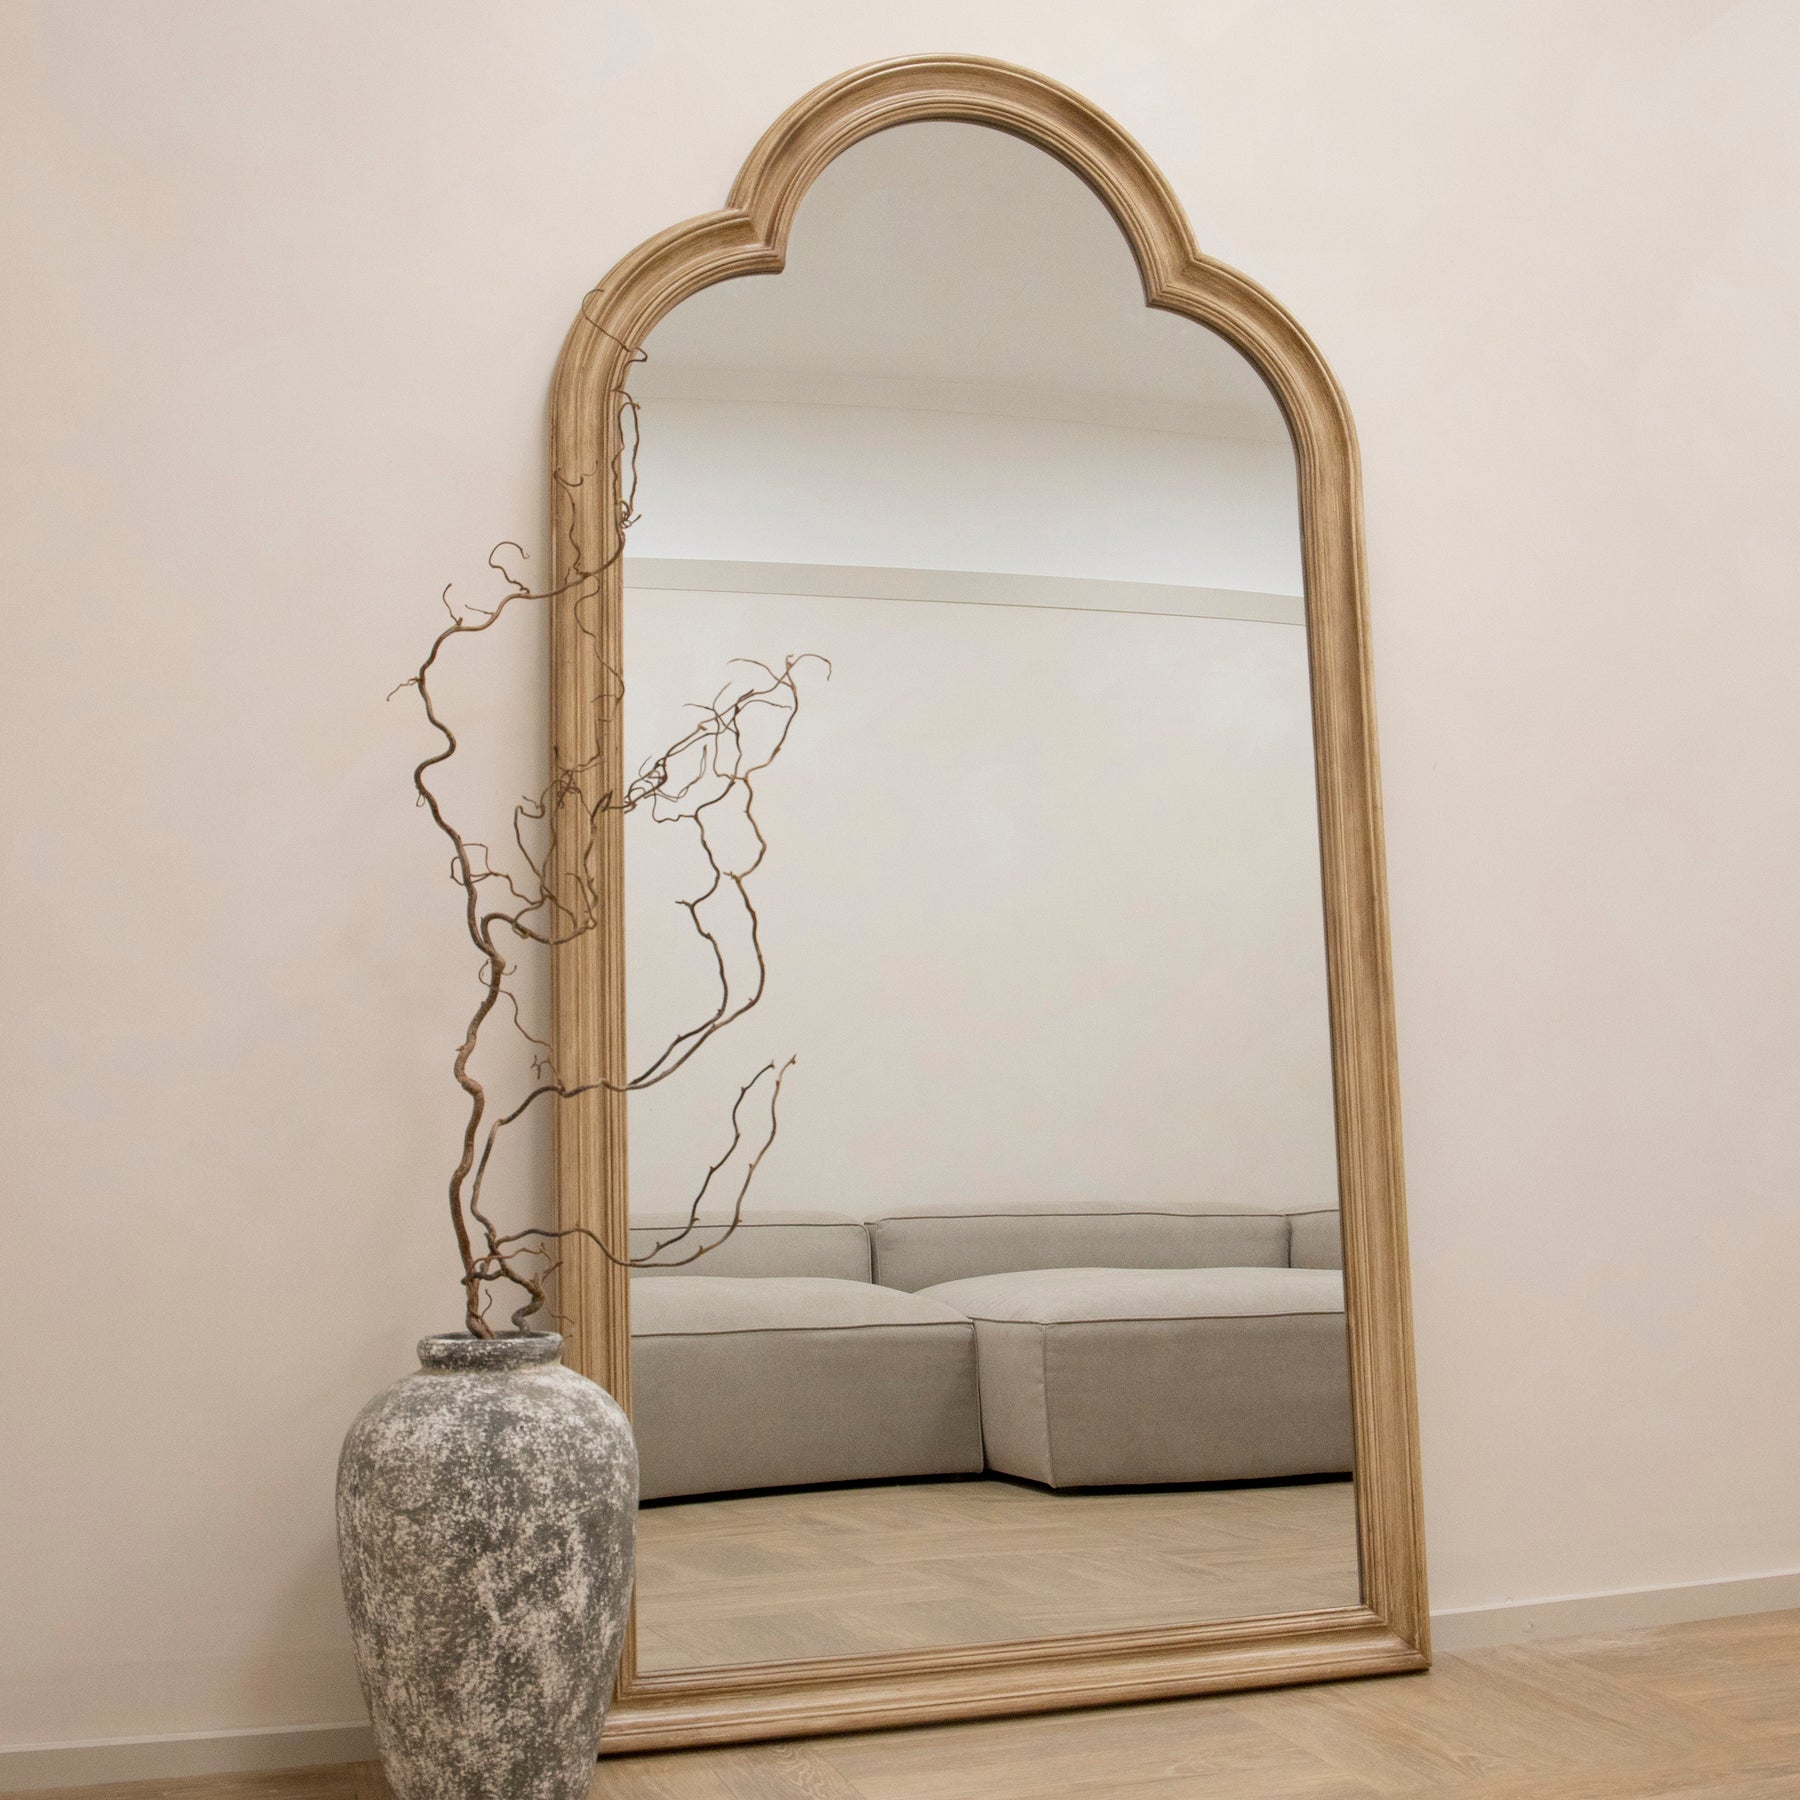 Washed Wood Arched Full Length Mirror reflecting sofa